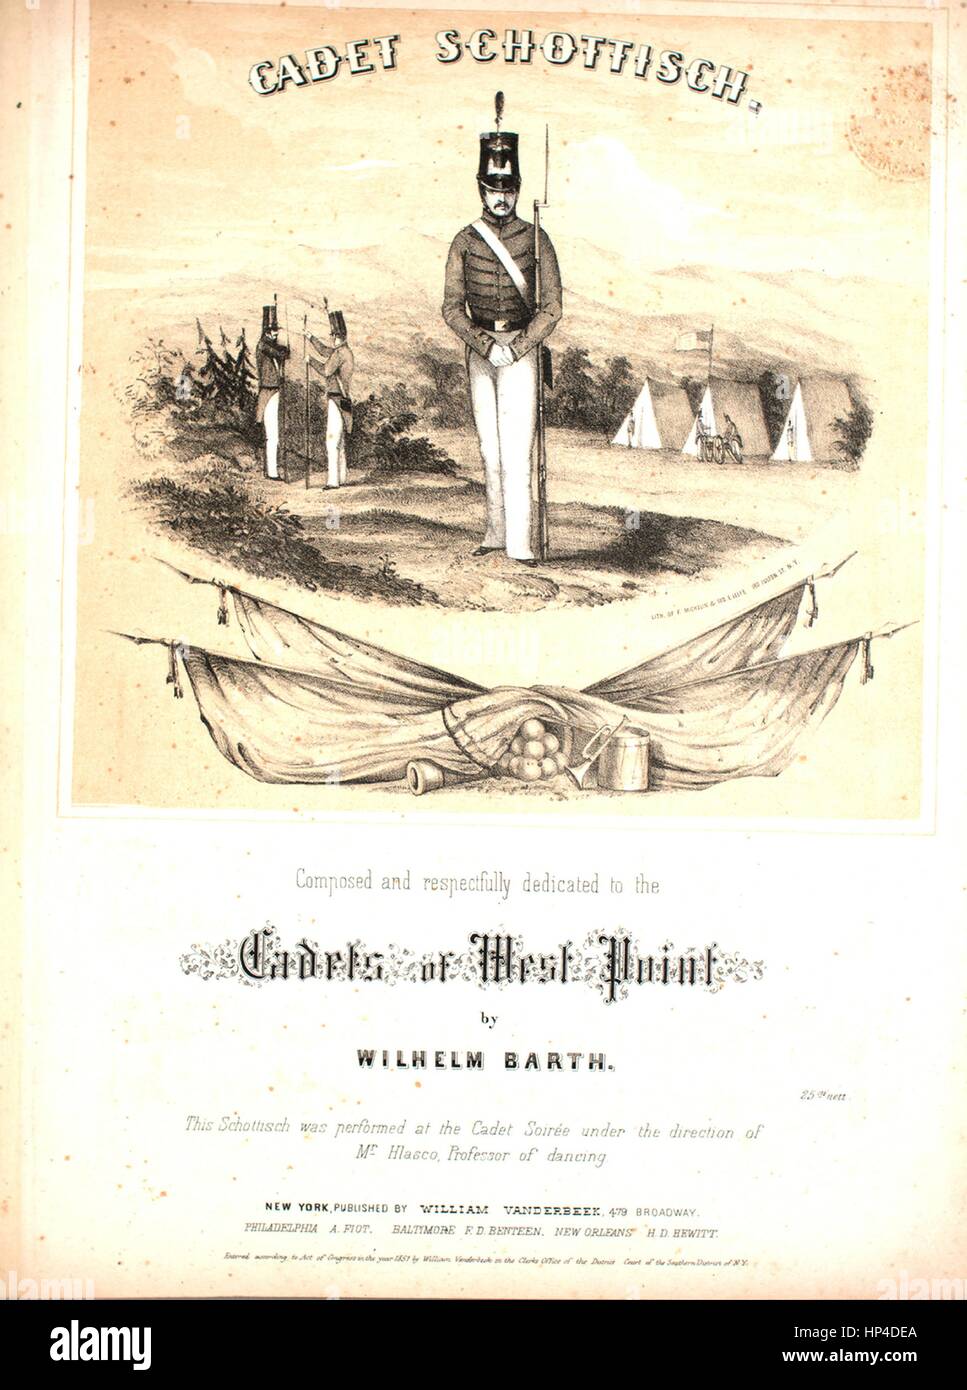 Sheet music cover image of the song 'Cadet Schottisch', with original authorship notes reading 'Composed By Wilhelm Barth', United States, 1851. The publisher is listed as 'William Vanderbeek, 479 Broadway', the form of composition is 'da capo, with trio', the instrumentation is 'piano', the first line reads 'None', and the illustration artist is listed as 'Lith. of F. Michelin and Geo. E. Leefe 180 Fulton St. N.Y.'. Stock Photo